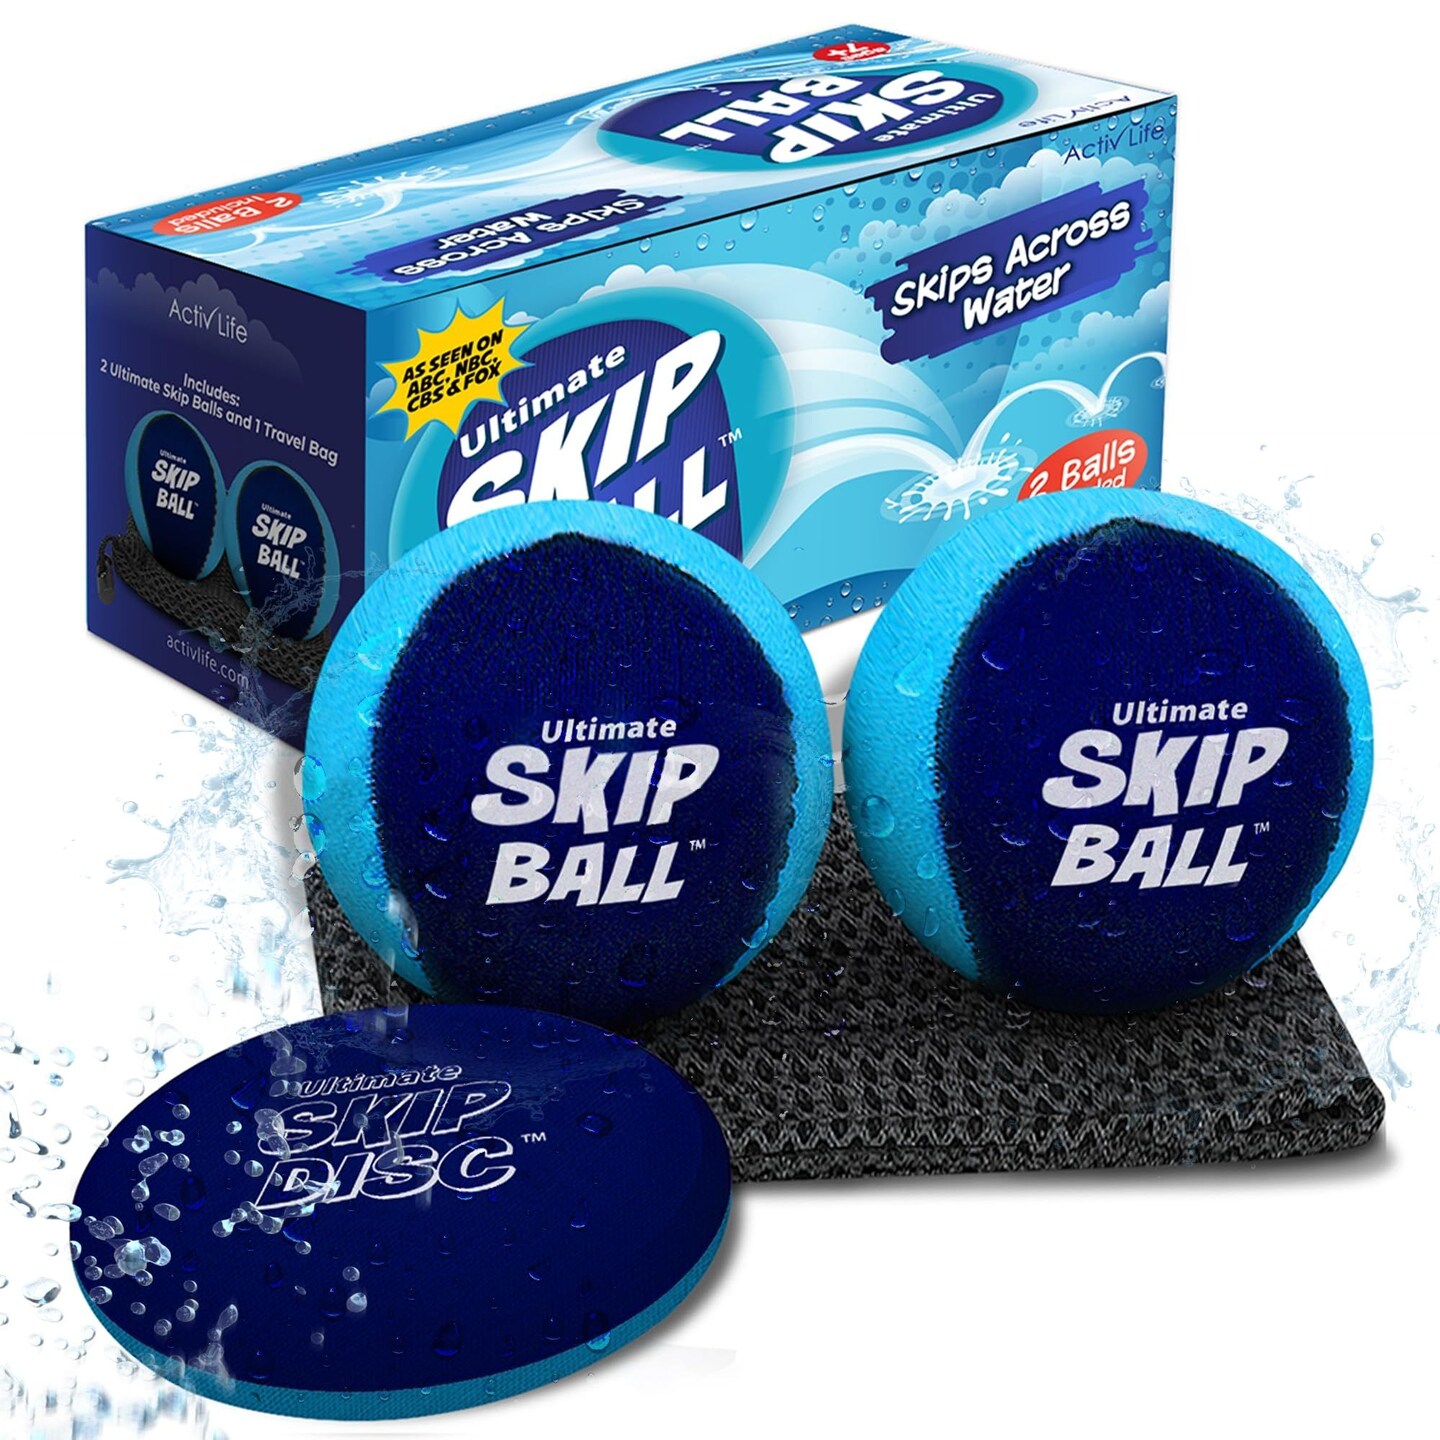 Easter Basket Stuffers for Boys [Water Skip Balls] Best Pool Toys for Kids Ages 8-12 Lake Toys Beach Gear Stuff Teen 7 9 10 11 Year Old Gift Ideas Games Family Men Son Him Outside Fun Birthday Present